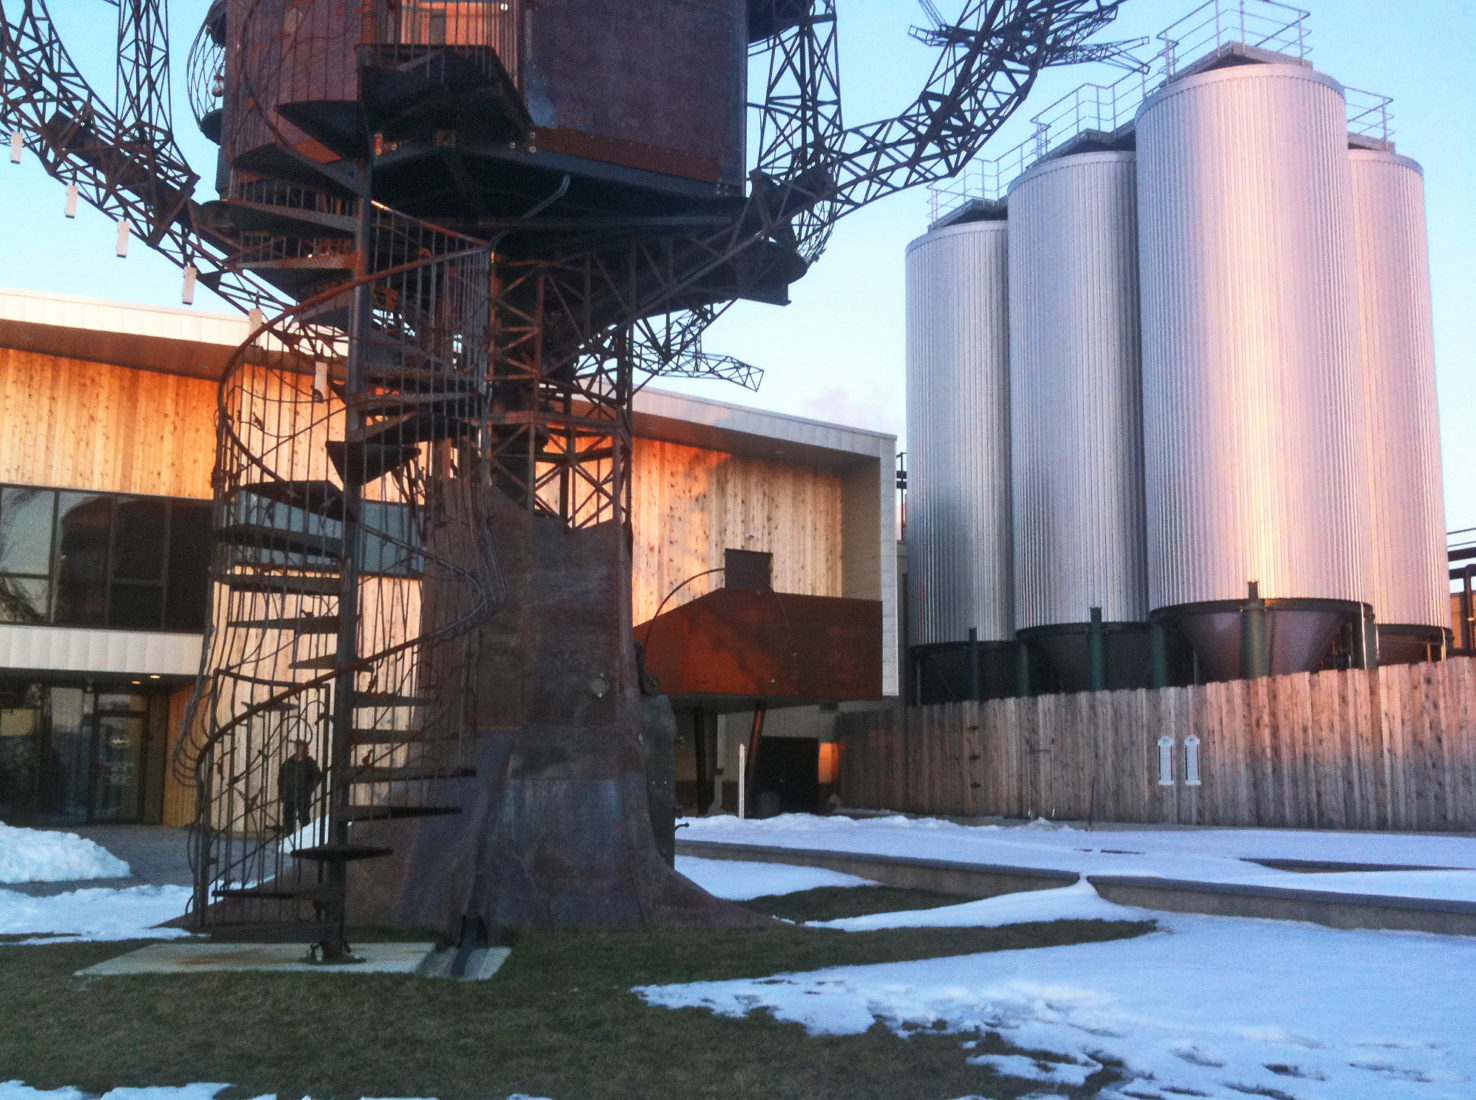 Dogfish Brewery, Lewes DE